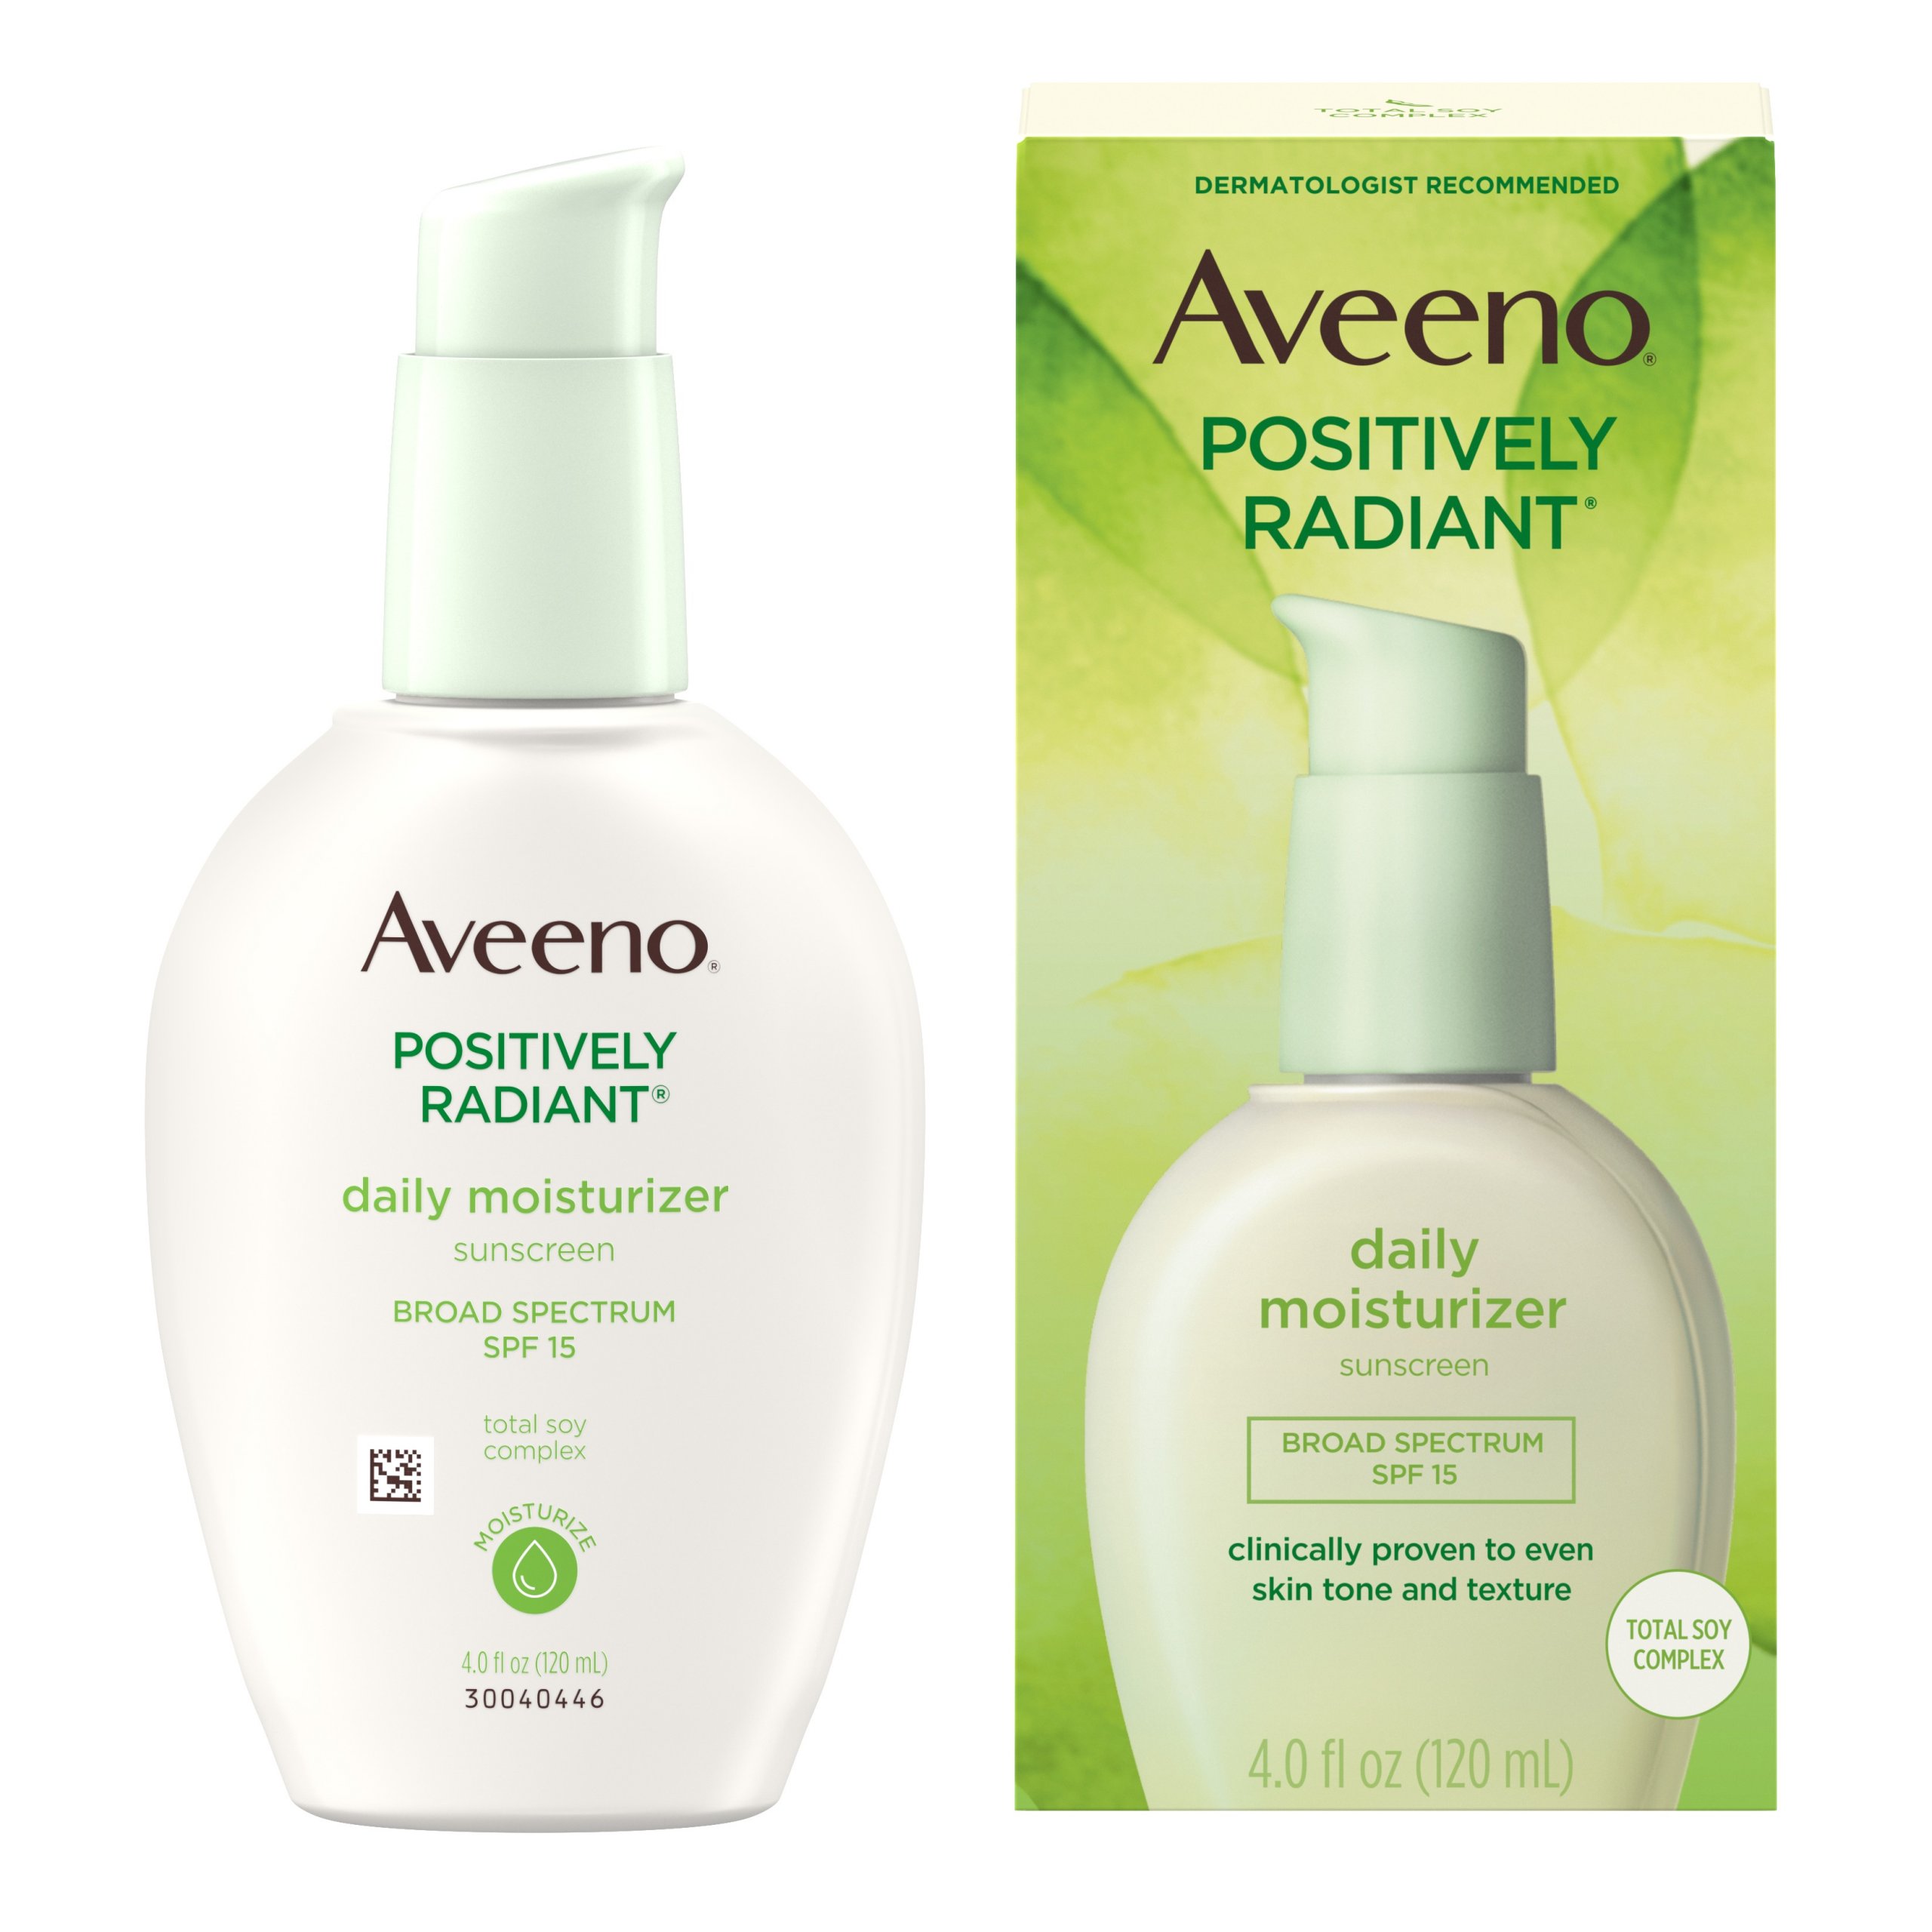 aveeno positively radiant daily moisturizer review